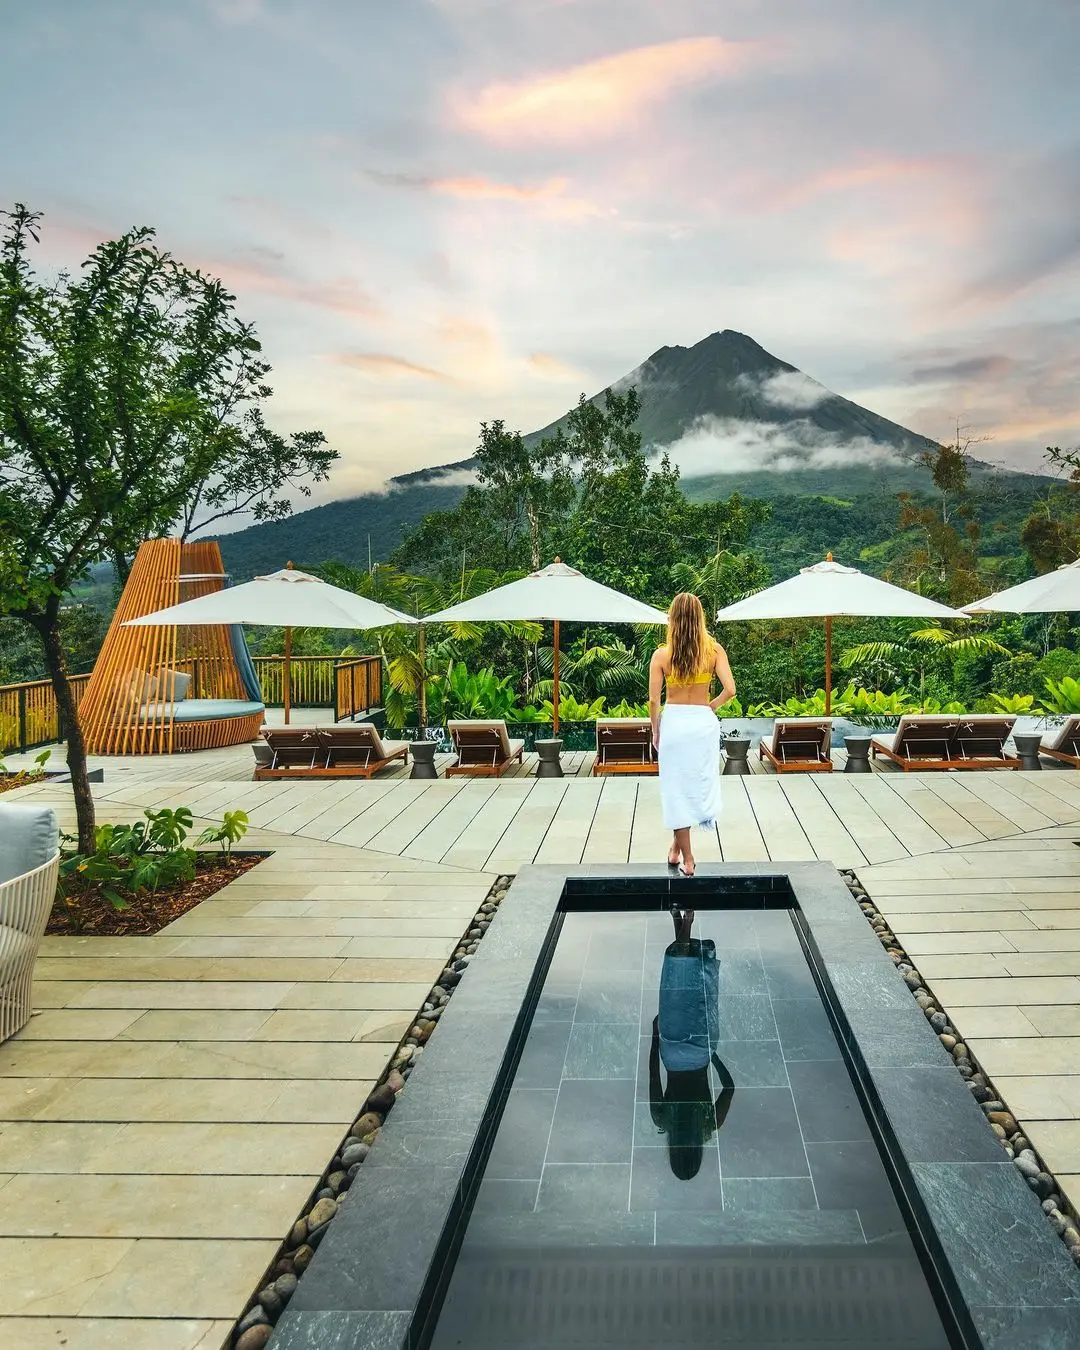 A woman standing on the edge of the pool of a resort and looking at an Arenal Volcano in Costa Rica